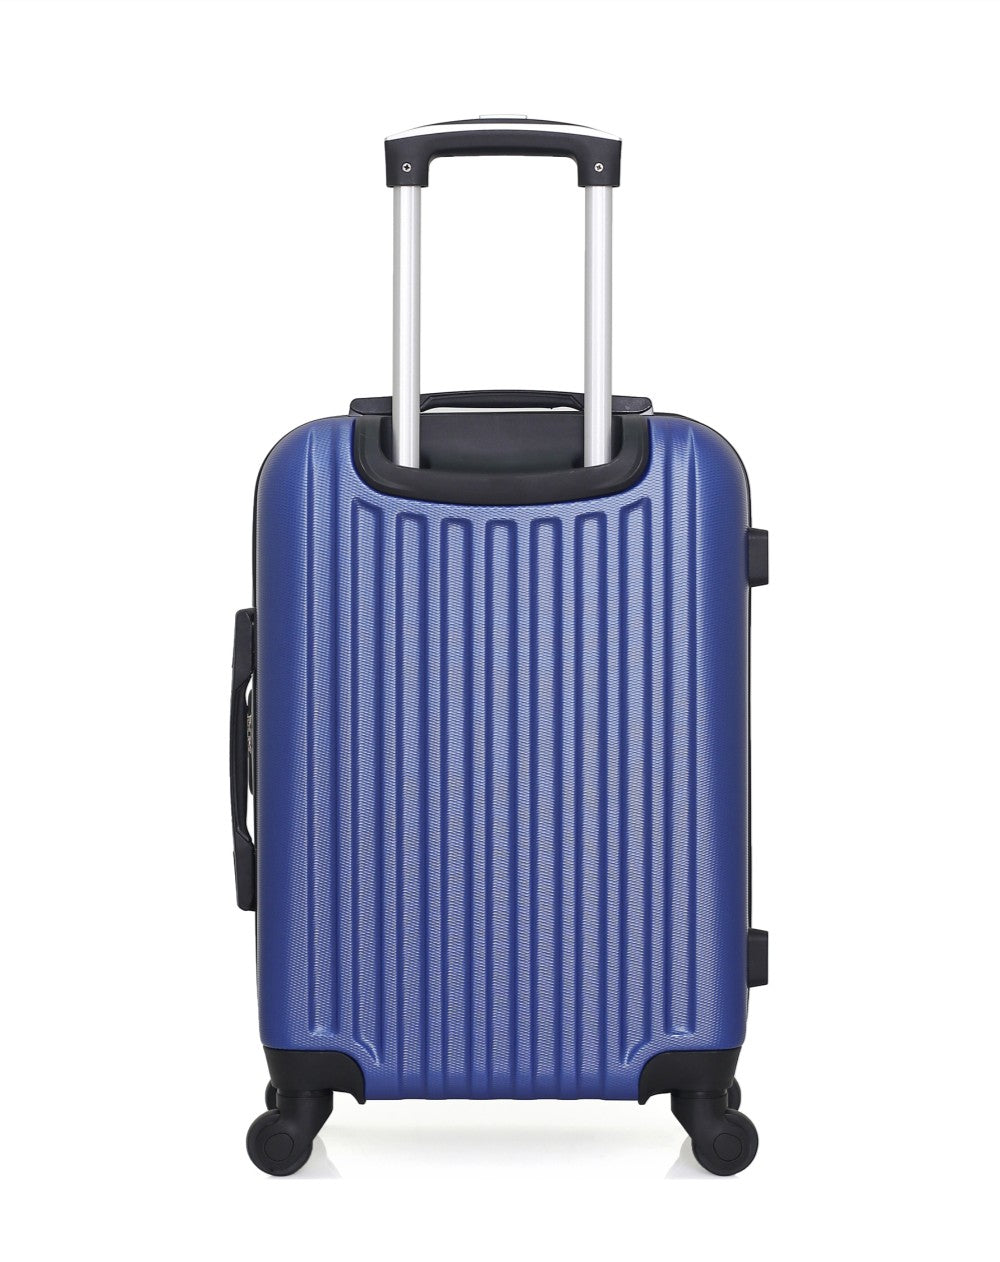 Valise Cabine ABS SPRINGFIELD 4 Roues 55 cm